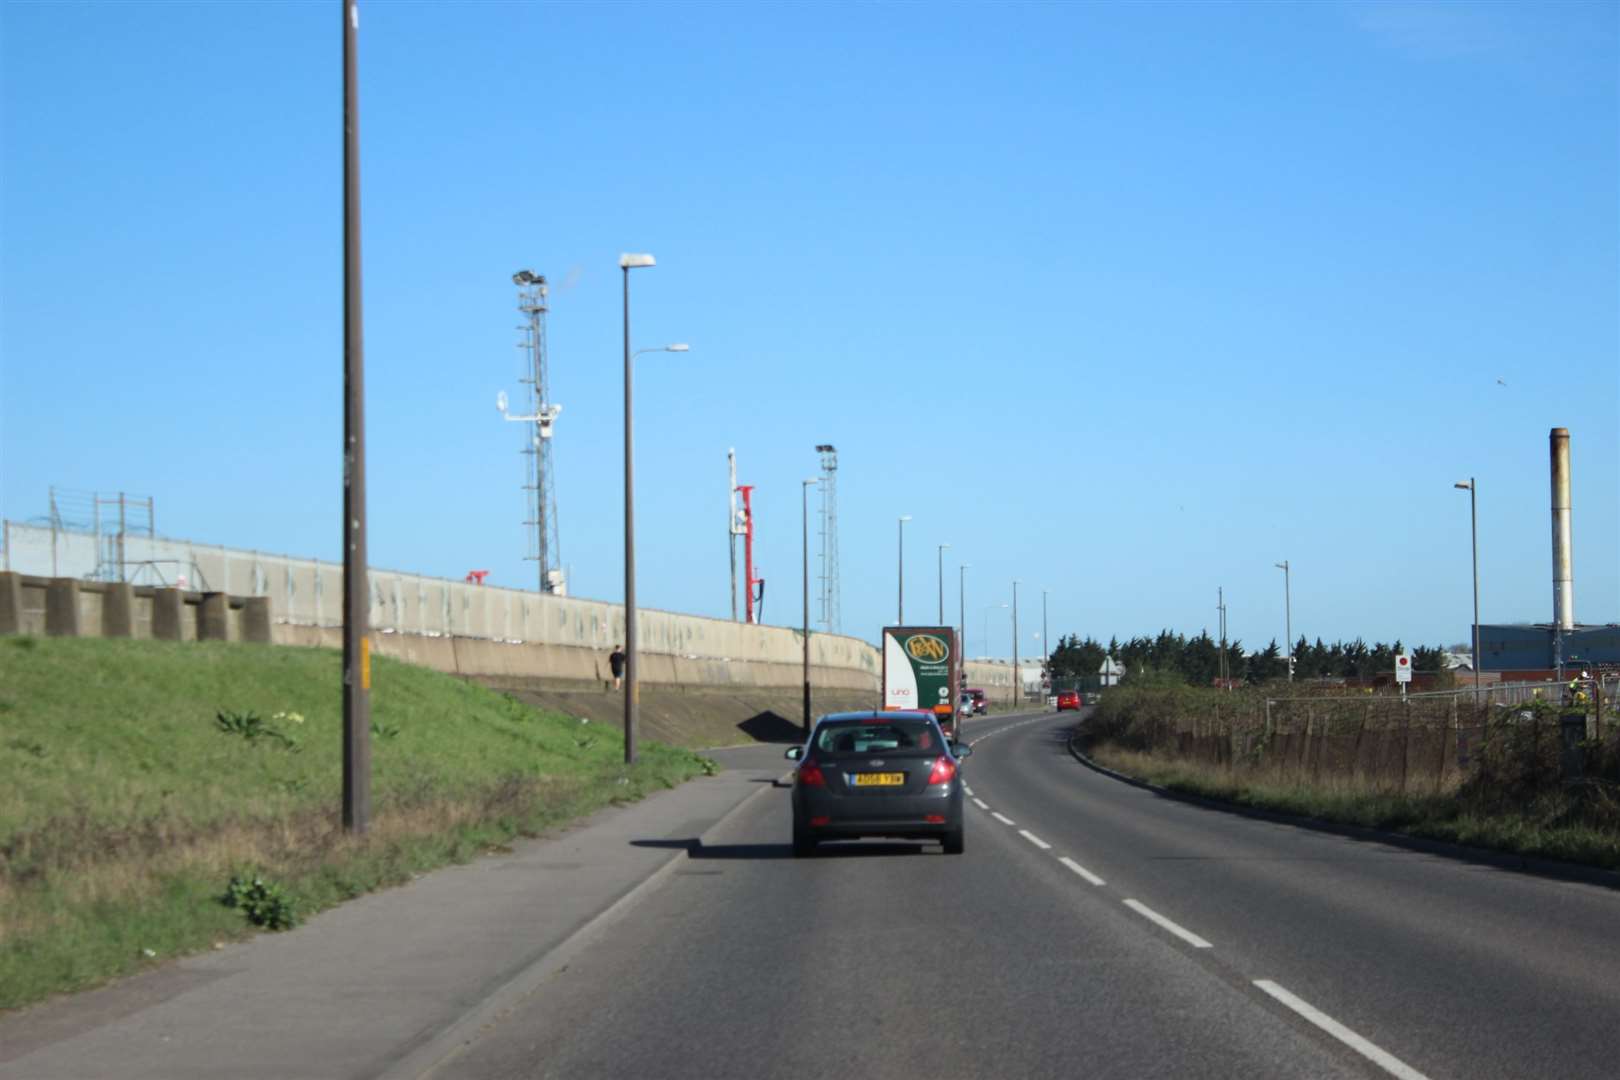 Brielle Way leading into Sheerness. The cement works would be built on the left behind the sea wall